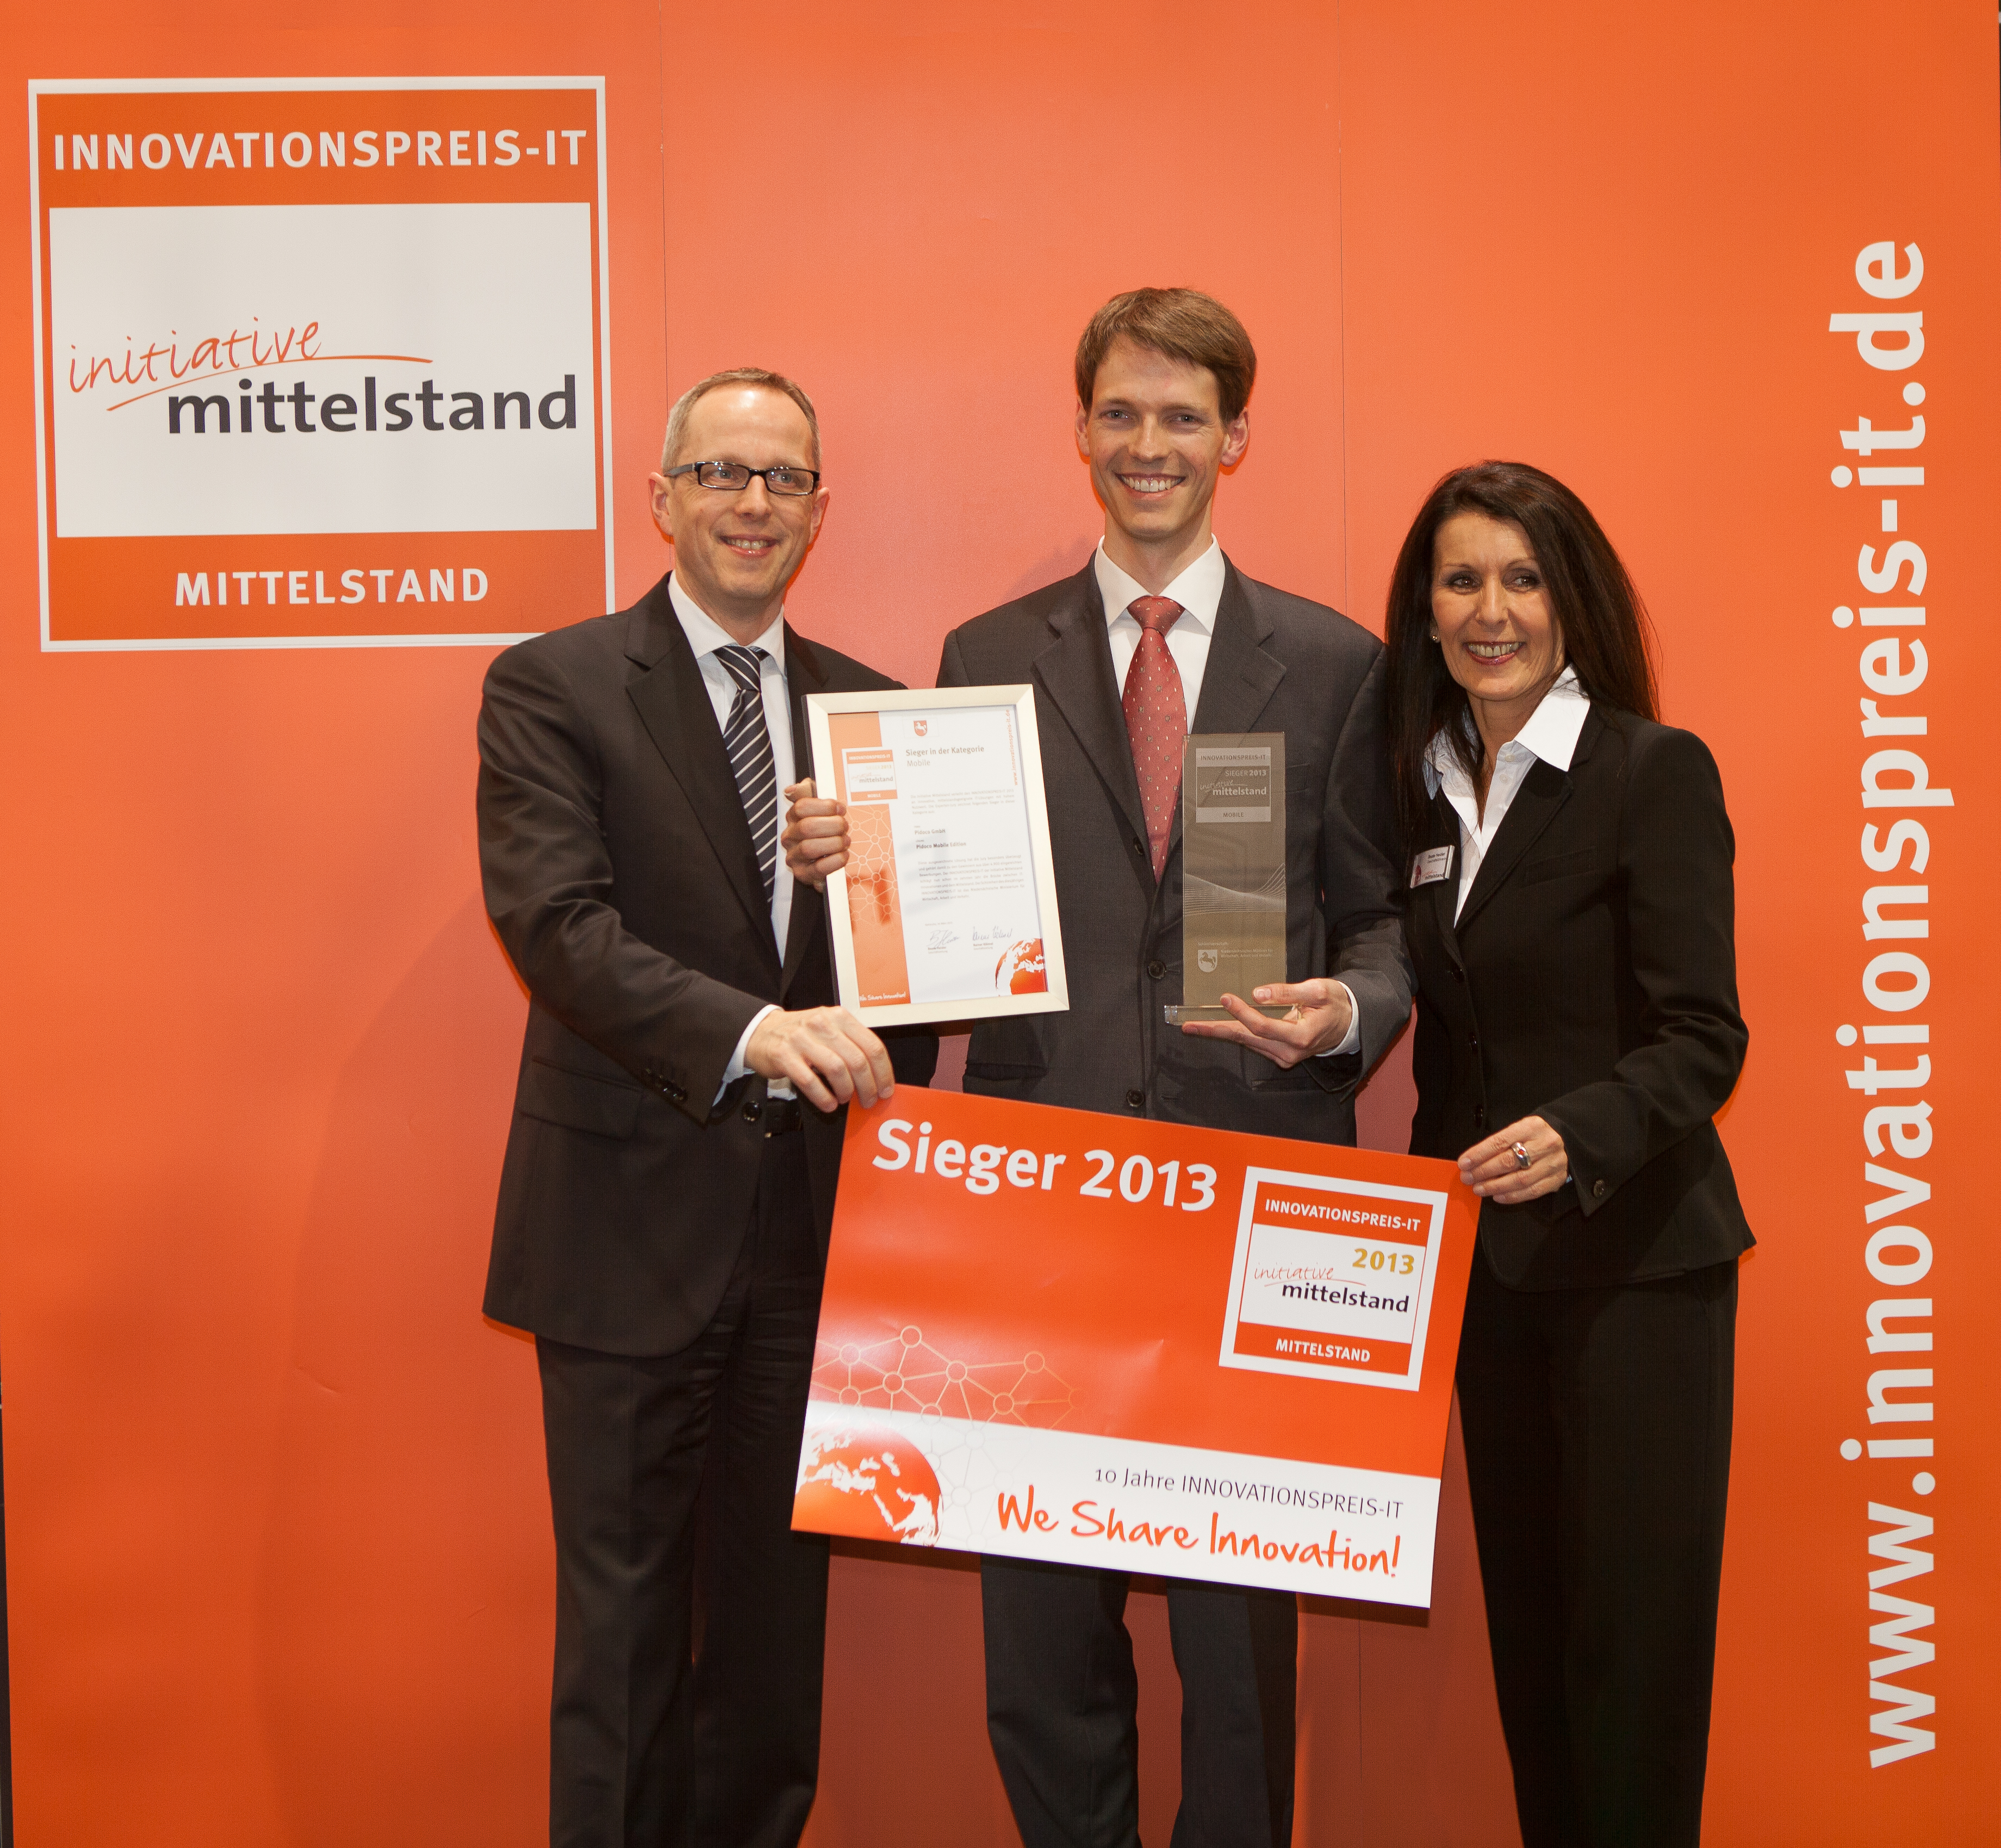 Pidoco receives the INNOVATIONSPREIS-IT 2013 in the category mobile